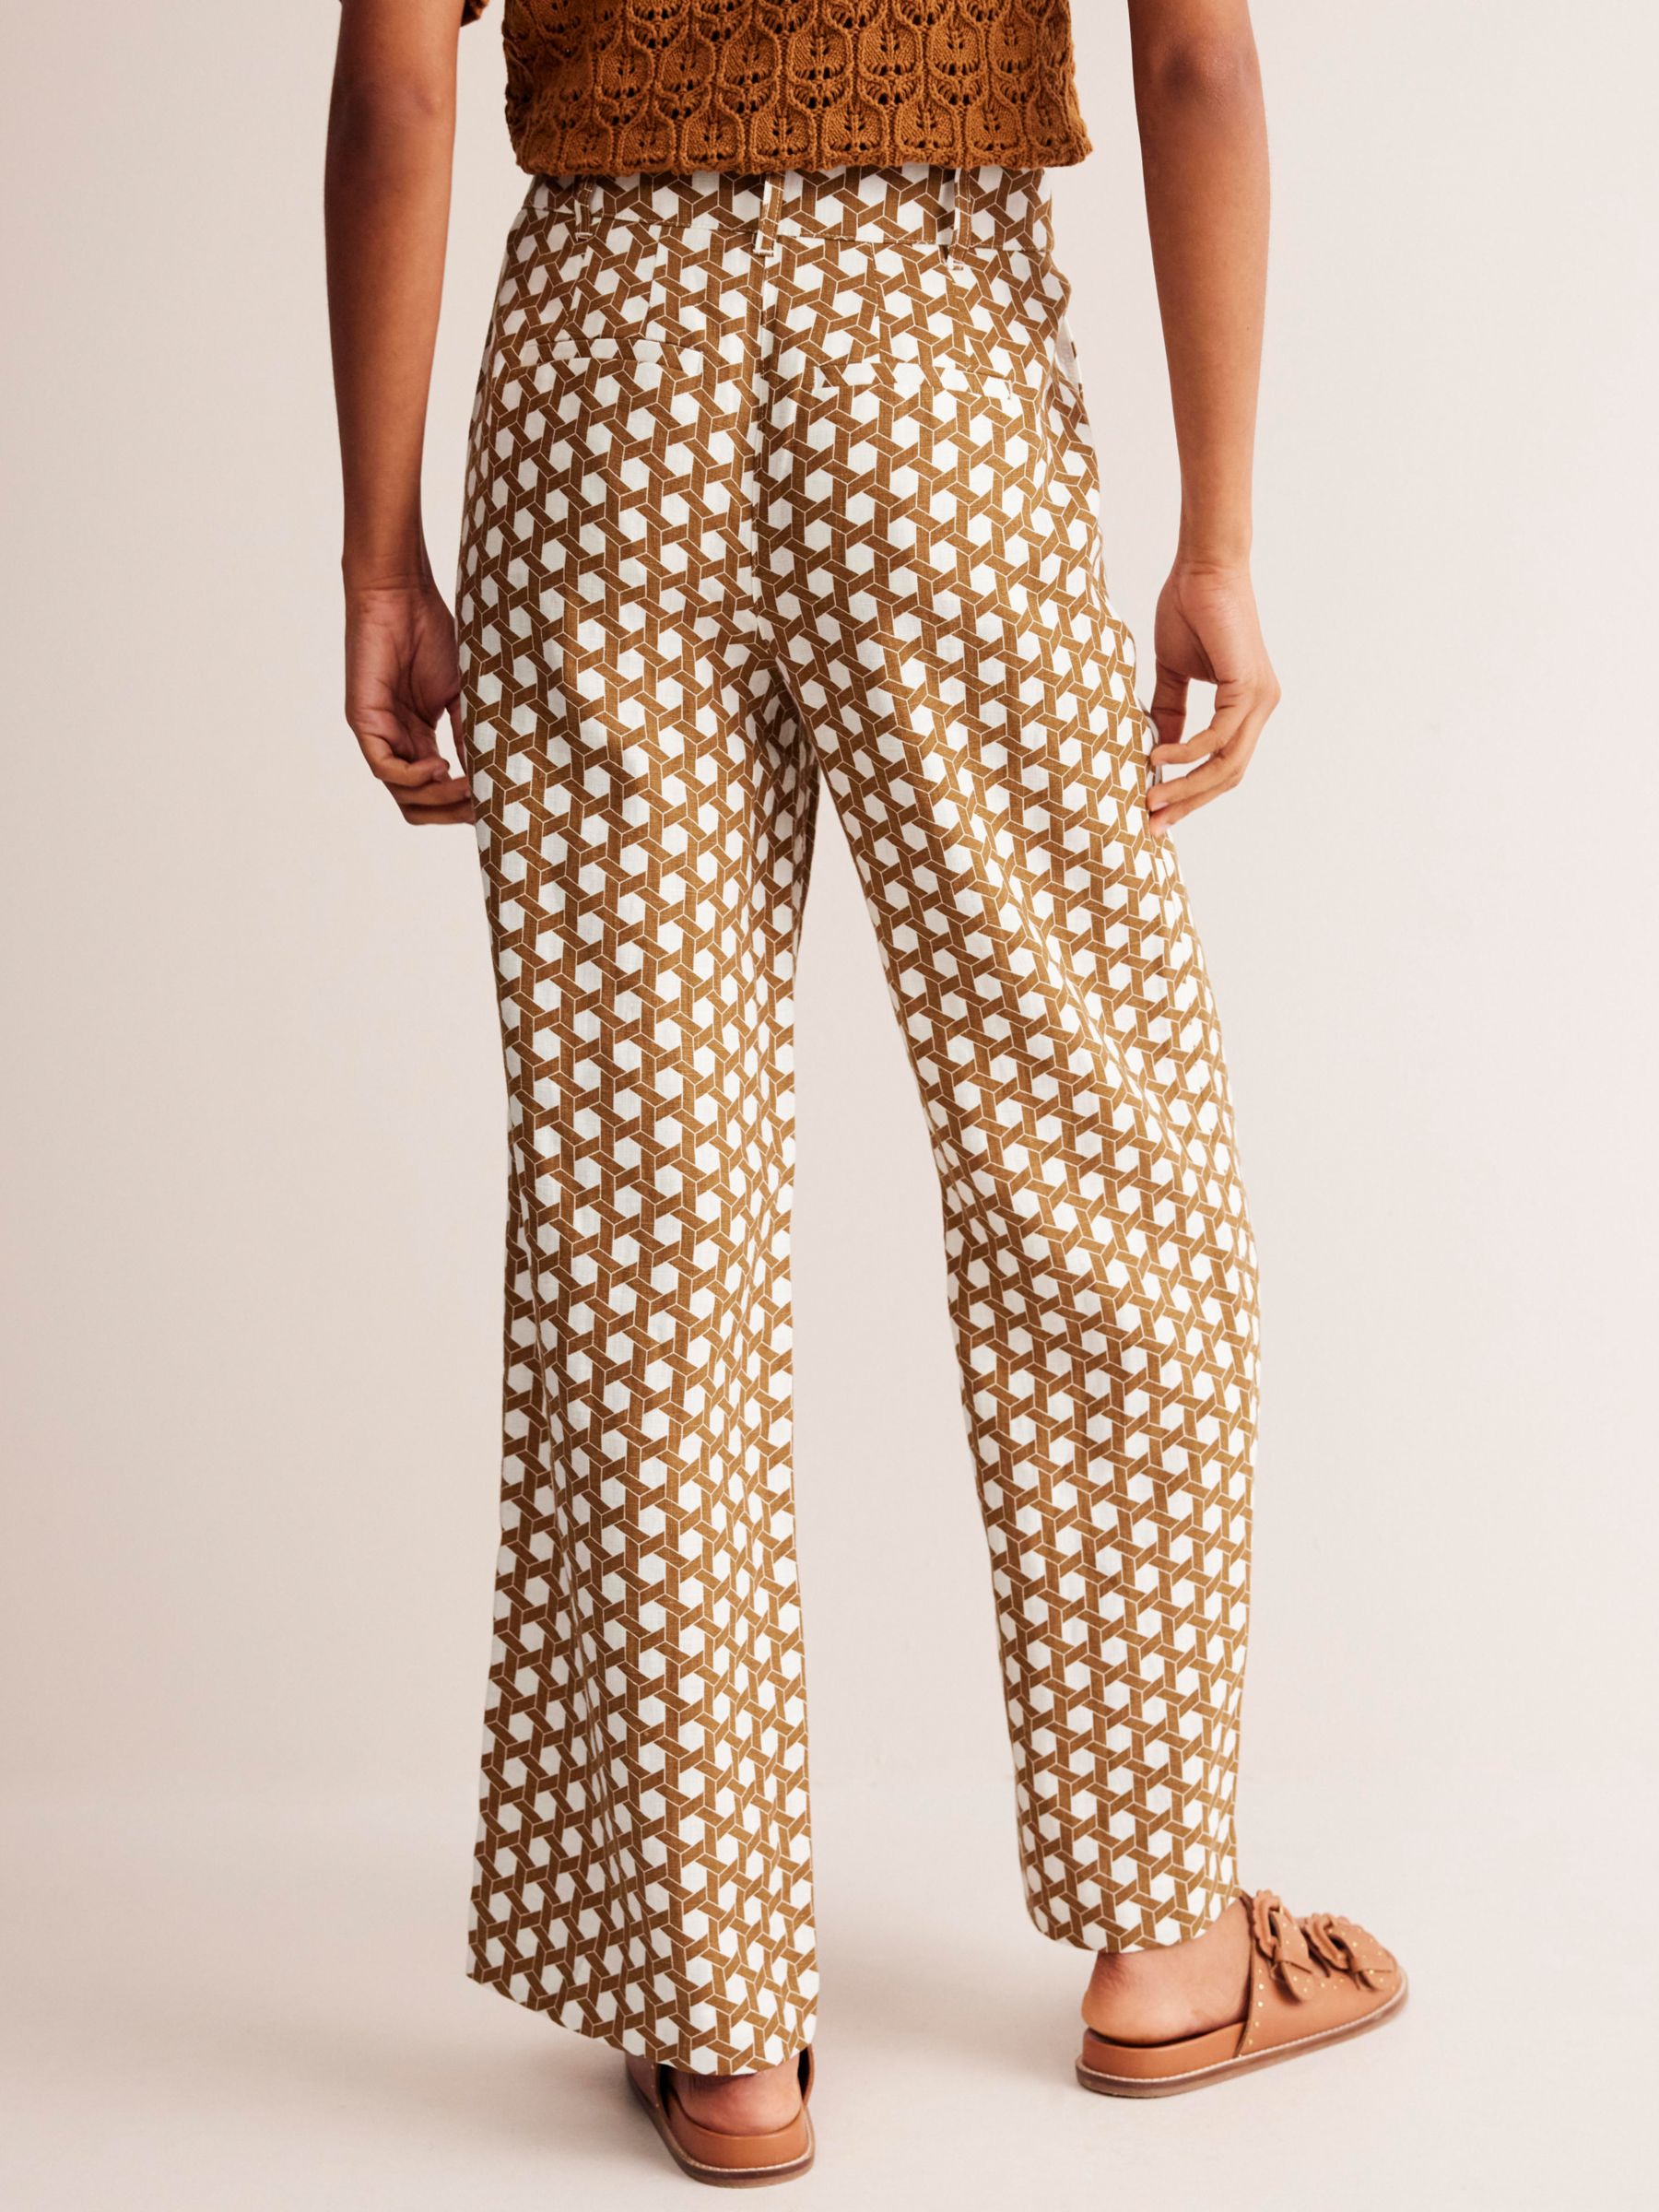 Boden Westbourne Geometric Honeycomb Print Linen Trousers, Brown/White, 8